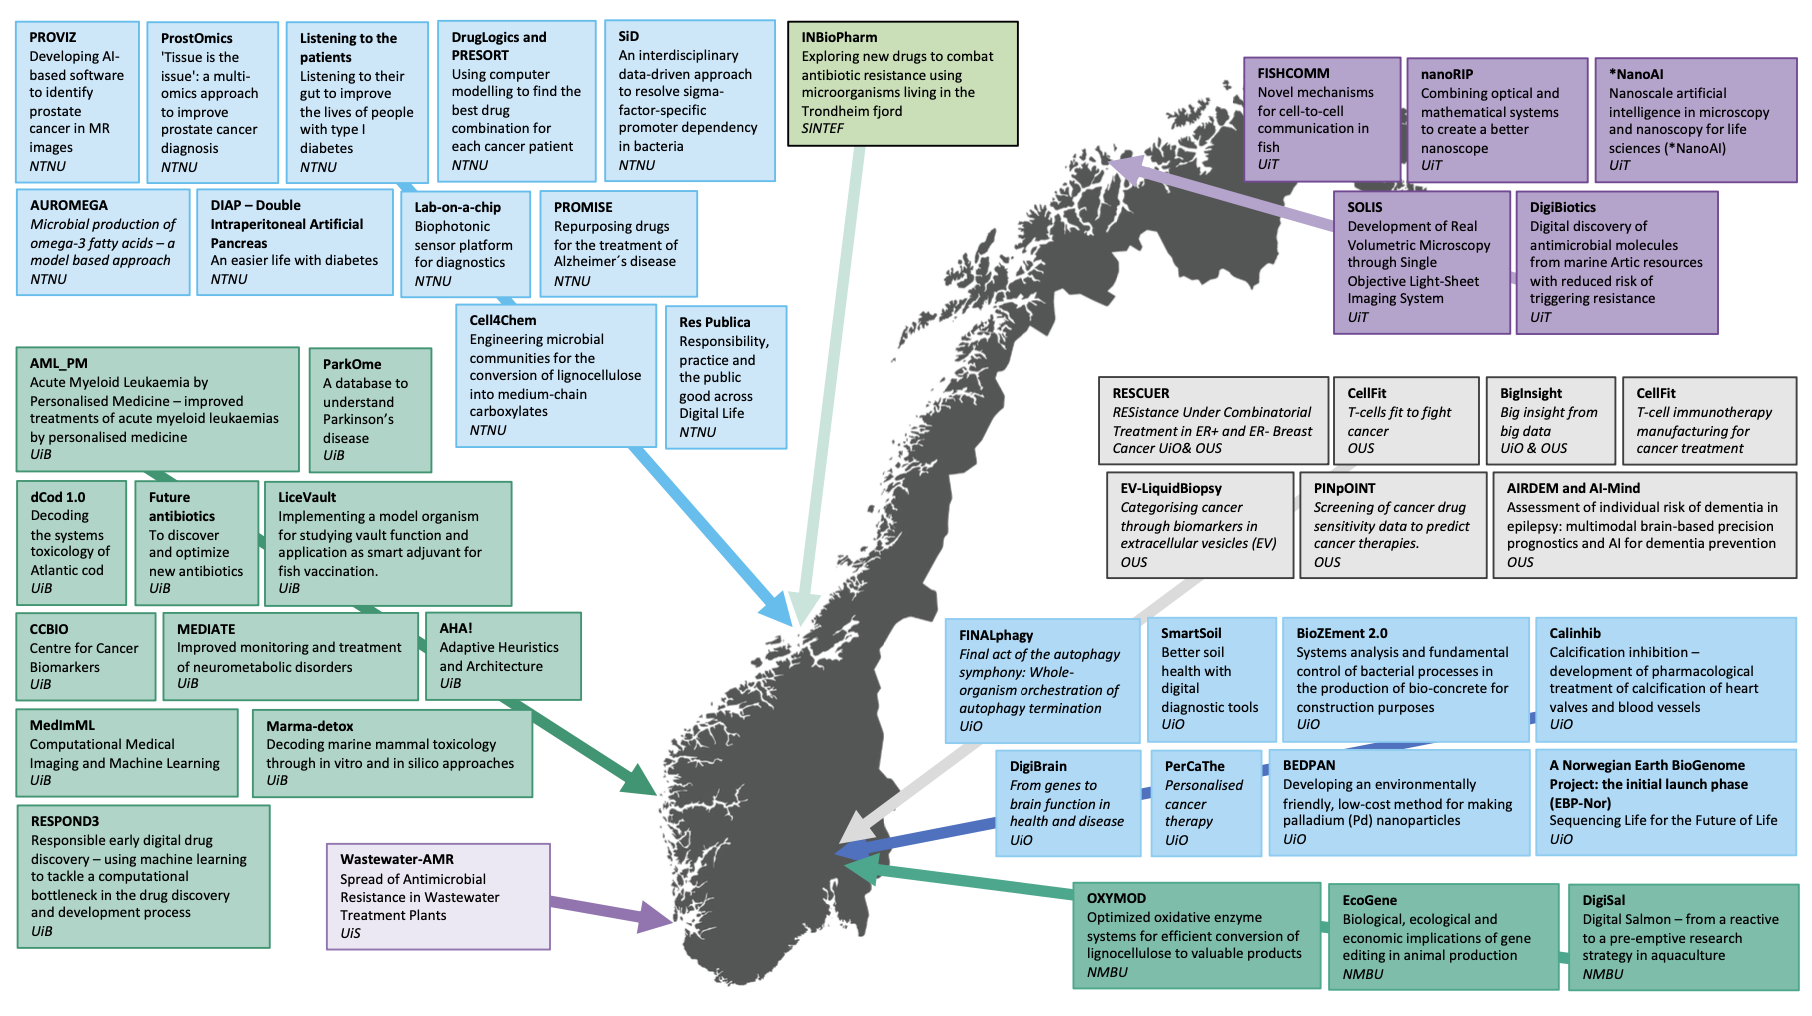 Figure 2. DLN host organizations. DLN ensures that the experiences from DLN are anchored in host institutions and other research and innovation organizations in Norway by promoting and catalyzing processes of learning within and across the DLN host organizations.